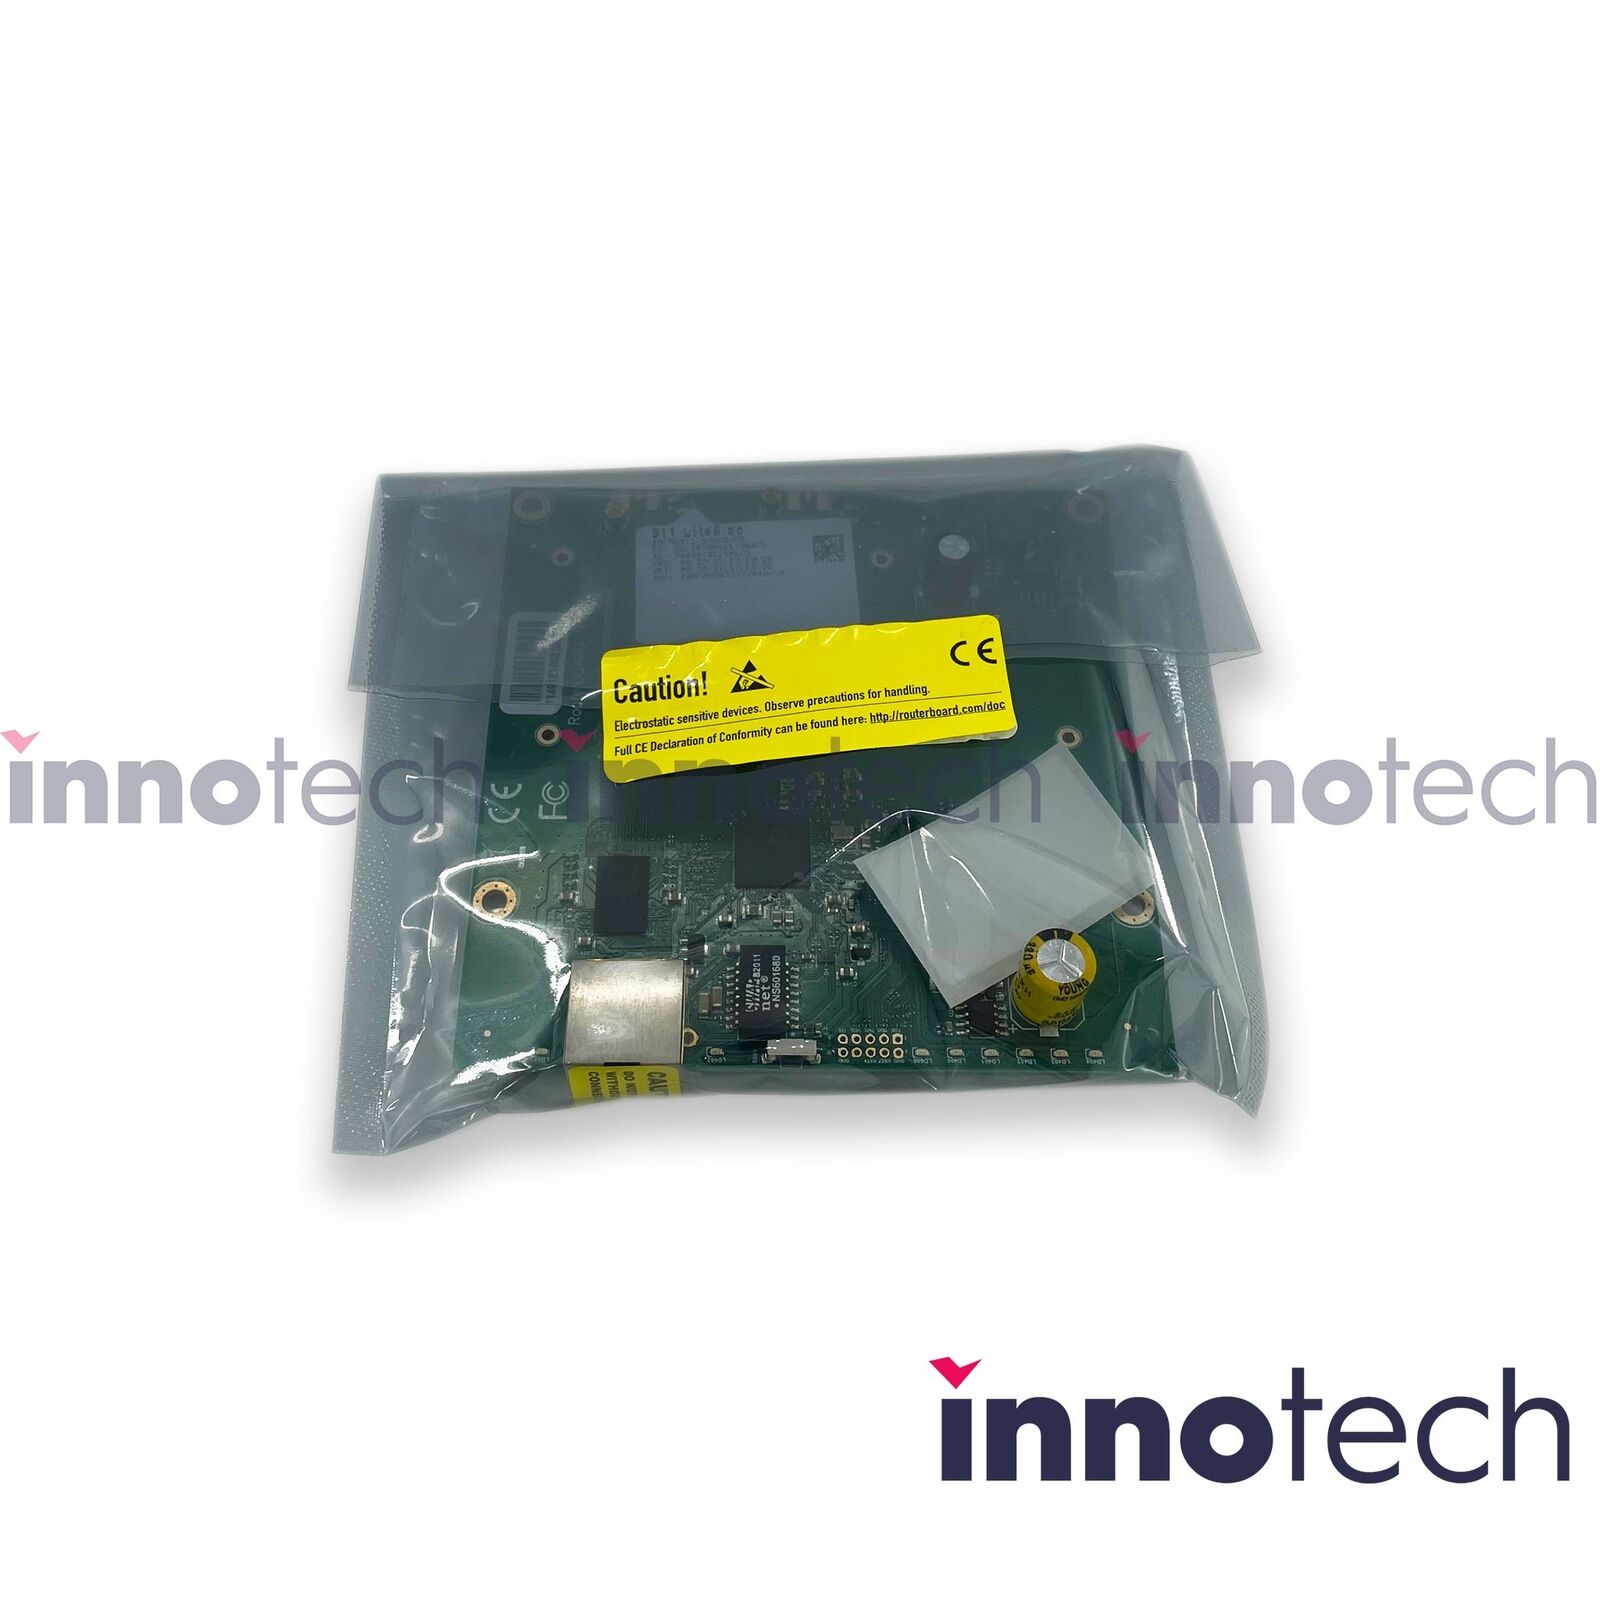 Mikrotik RB911-5HacD-US CPE type RouterBOARD Wireless Card New Sealed